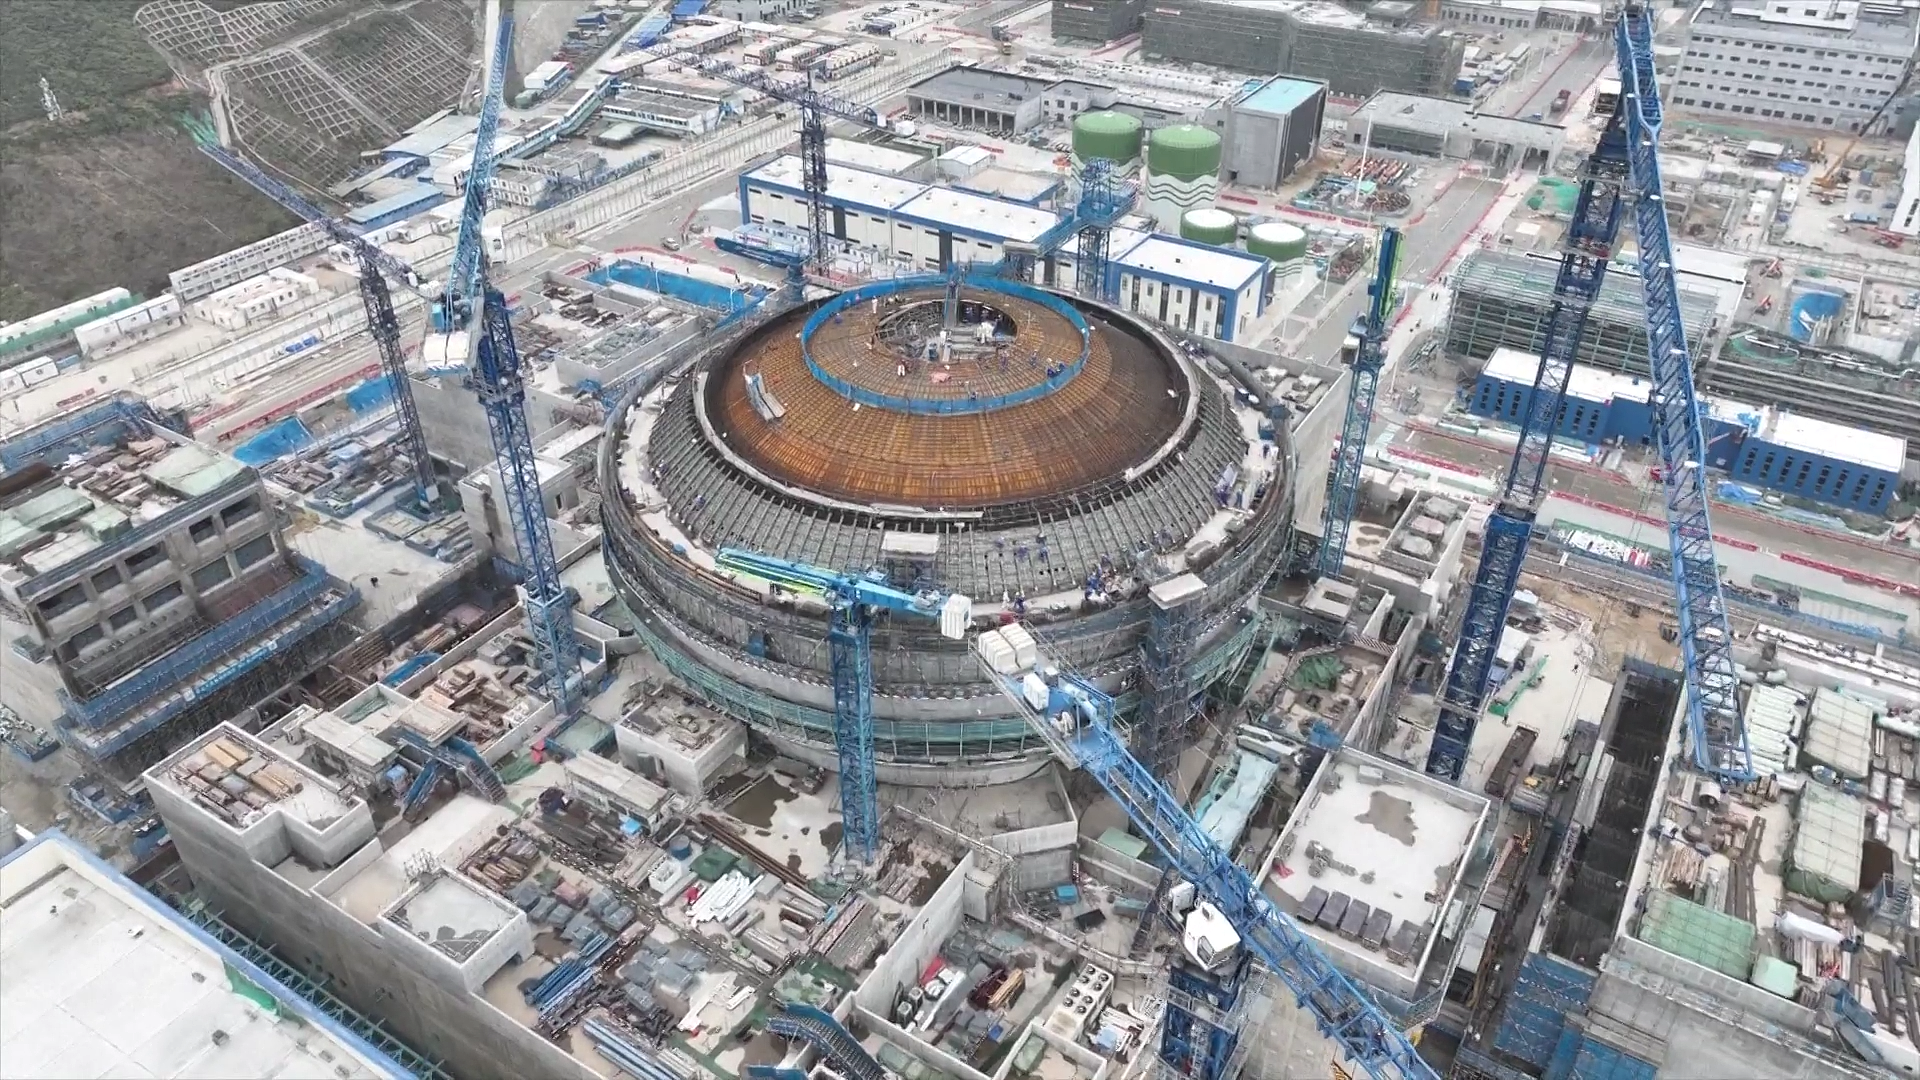 The Hualong-1 nuclear power unit is seen under construction at the Taipingling nuclear power plant, located in Huizhou City, south China's Guangdong Province. /CFP